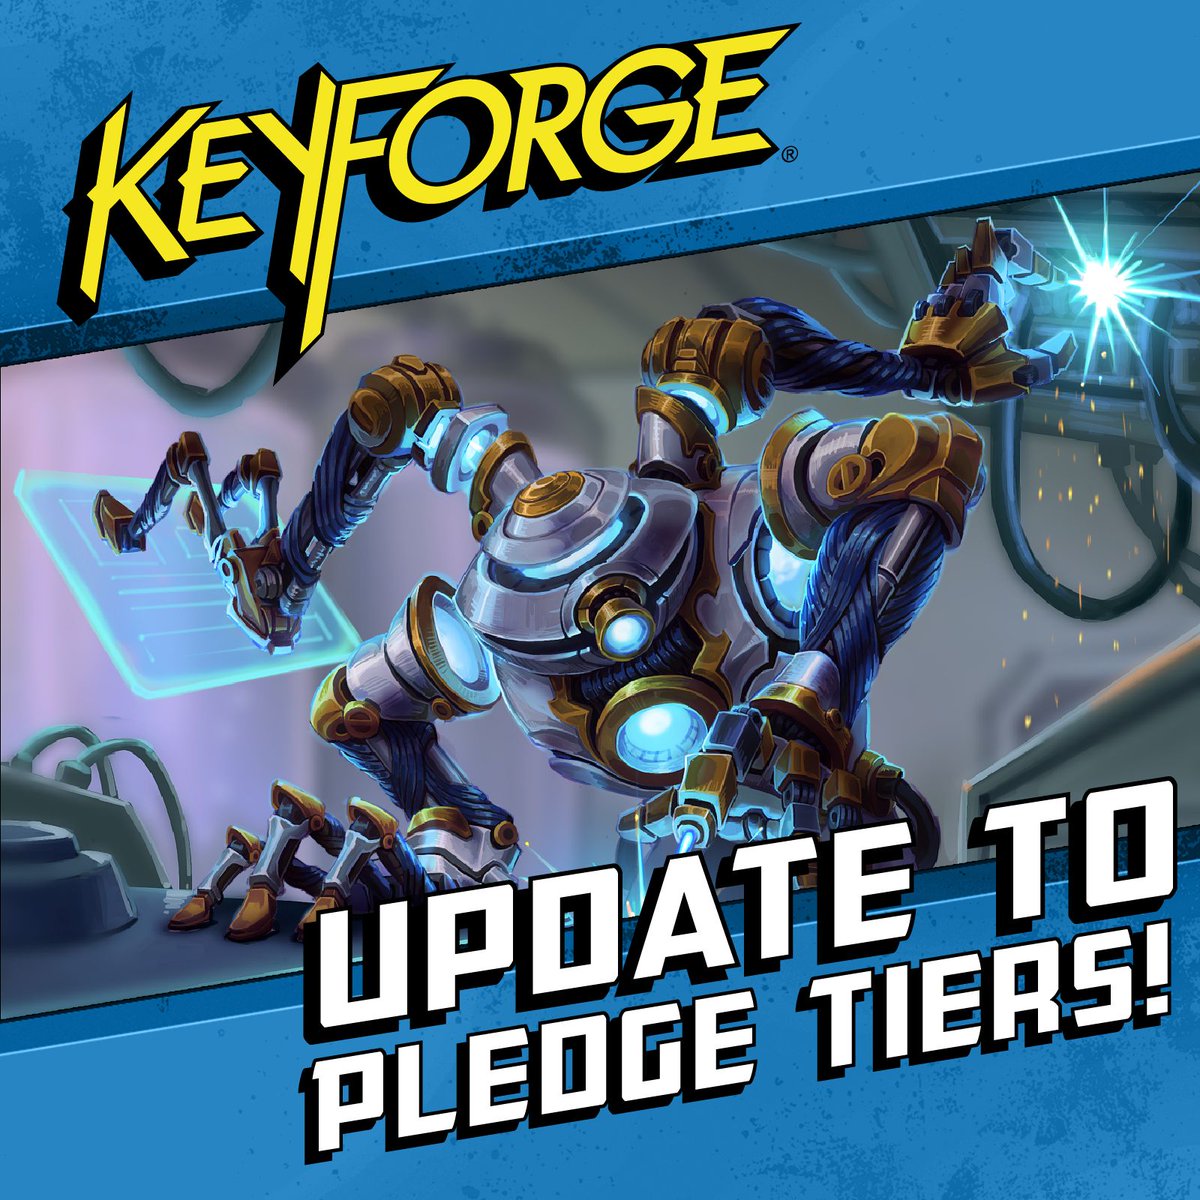 We went back to the drawing board on the upcoming KeyForge: Æmber Skies Gamefound campaign reward tiers. We heard your feedback and made changes to better align with what we and you want from each tier. Check out the changes now!

buff.ly/3xu7V1V